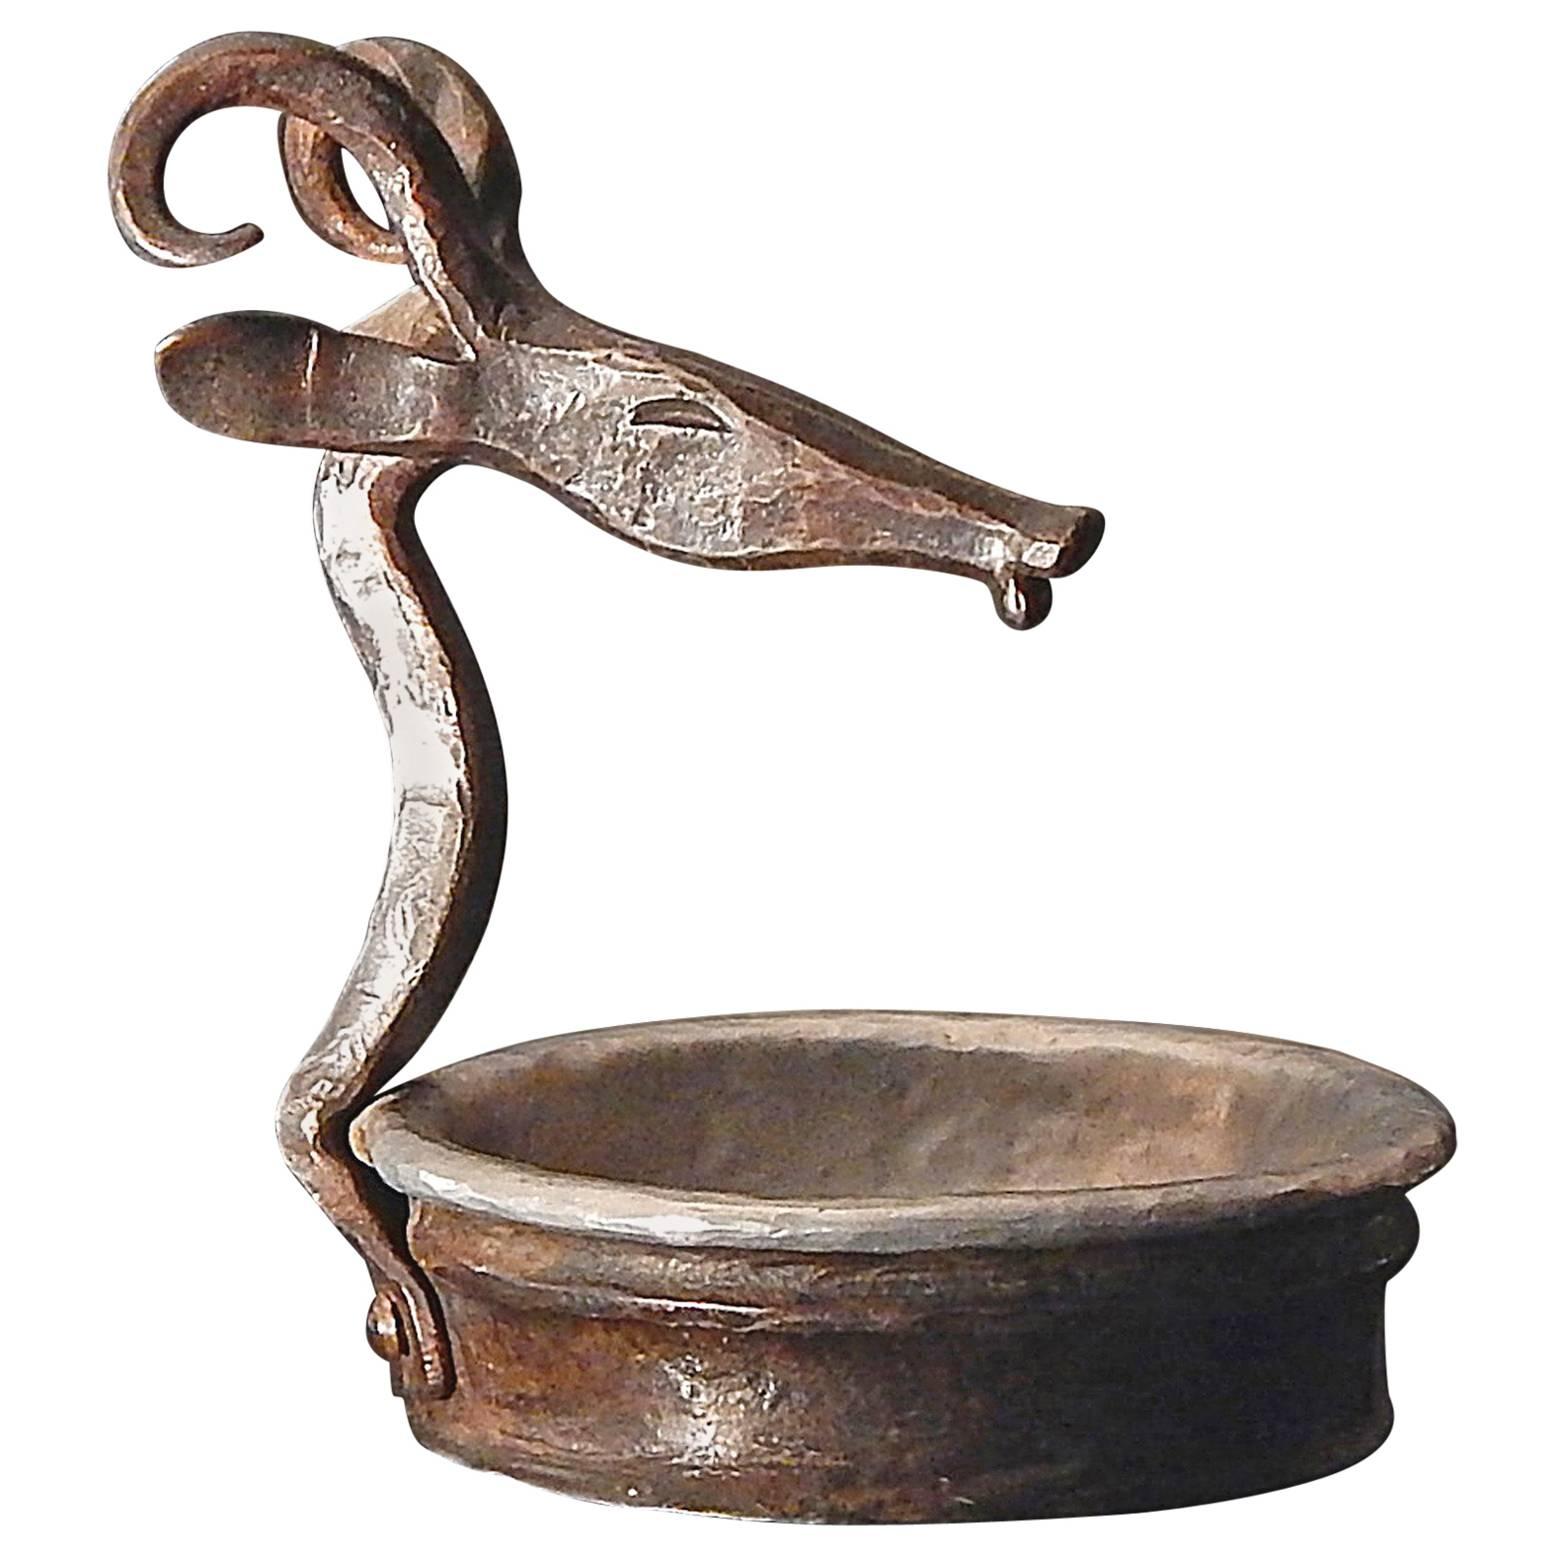 "Antelope Pin Dish, " Hand-Forged Art Deco Piece, Wrought Iron and Pewter